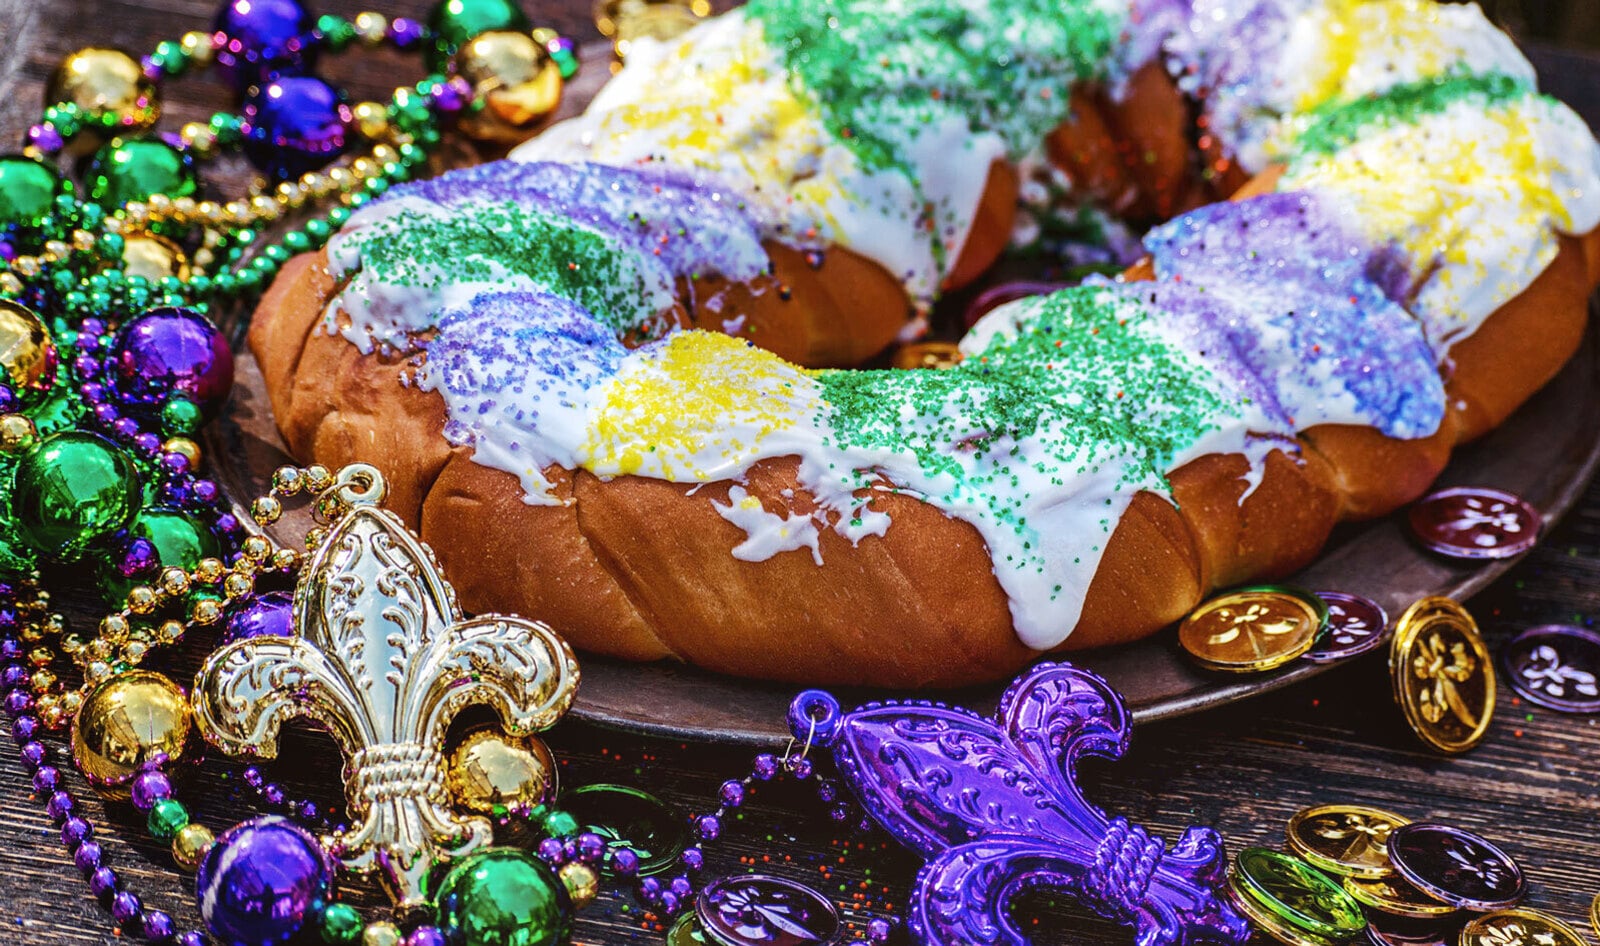 7 Vegan Recipes to Get You In the Mardi Gras Mood